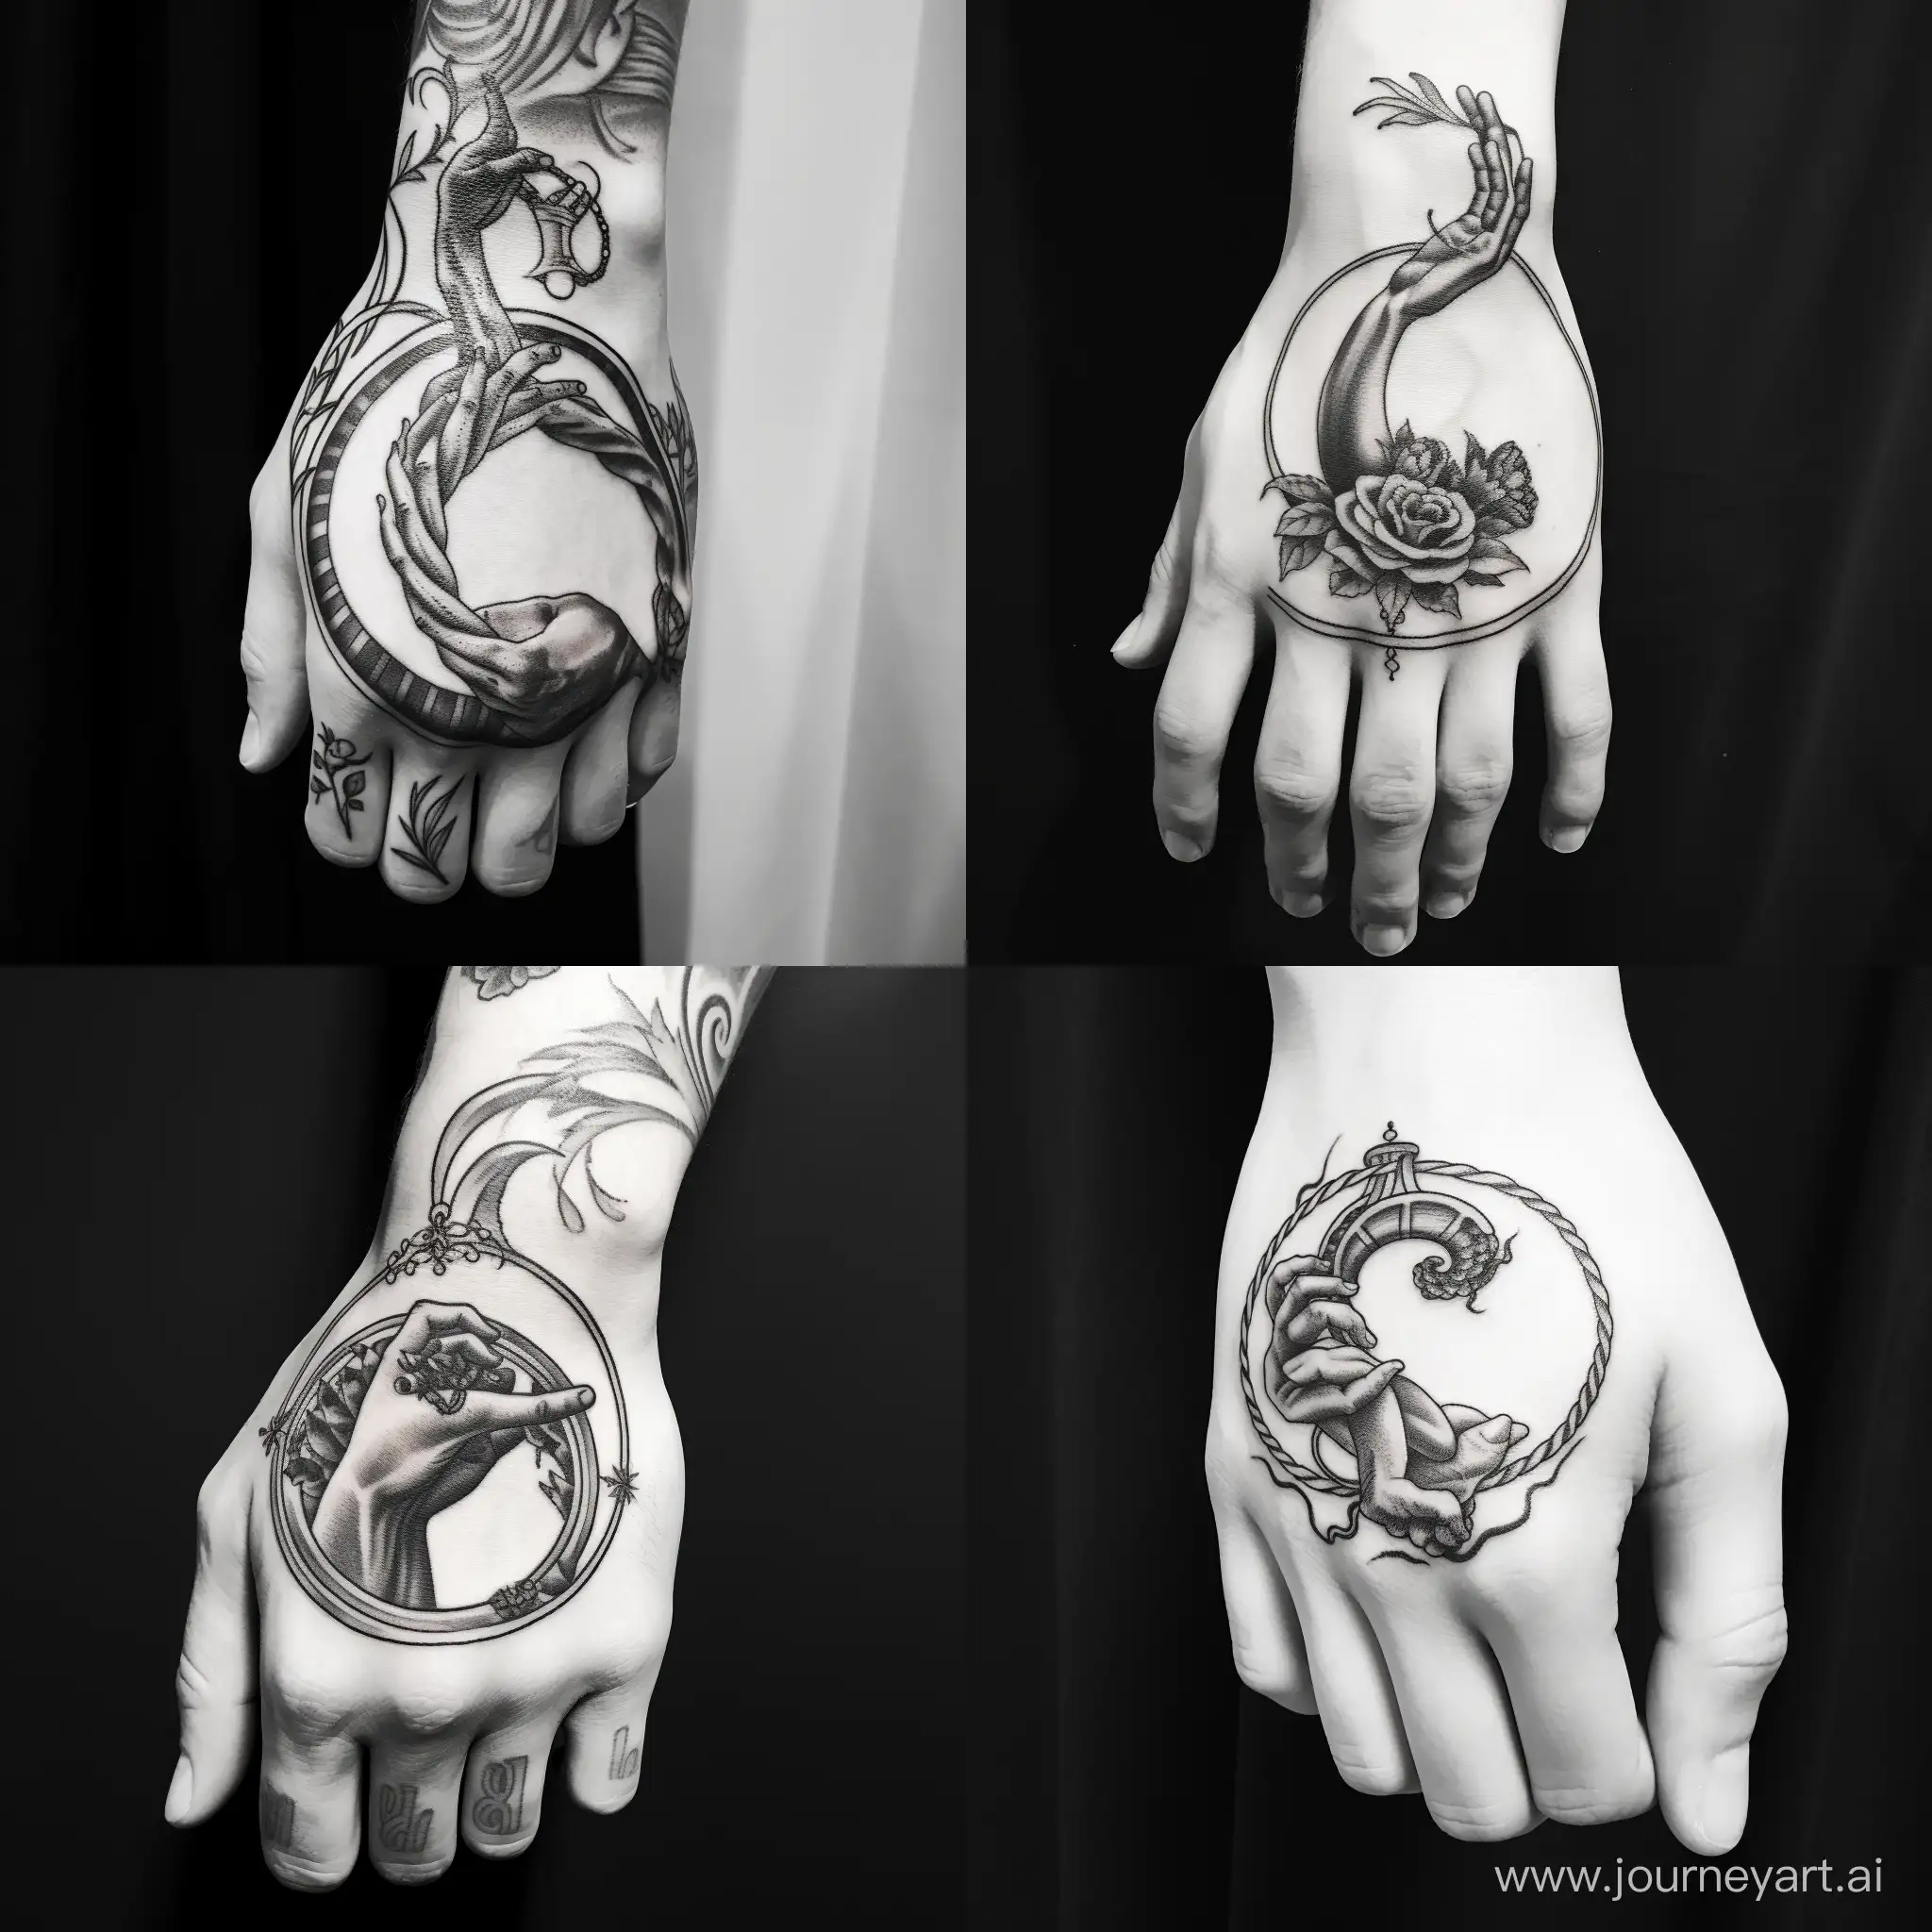  a compelling Sisyphus-themed tattoo for your right palm, symbolizing the eternal struggle with clean lines, black-and-white contrast, and a subtle thorny wreath. Tailored to the palm's curves, this design offers timeless allure, capturing the essence of Sisyphus's enduring spirit encircled by the symbolic thorny wreath.